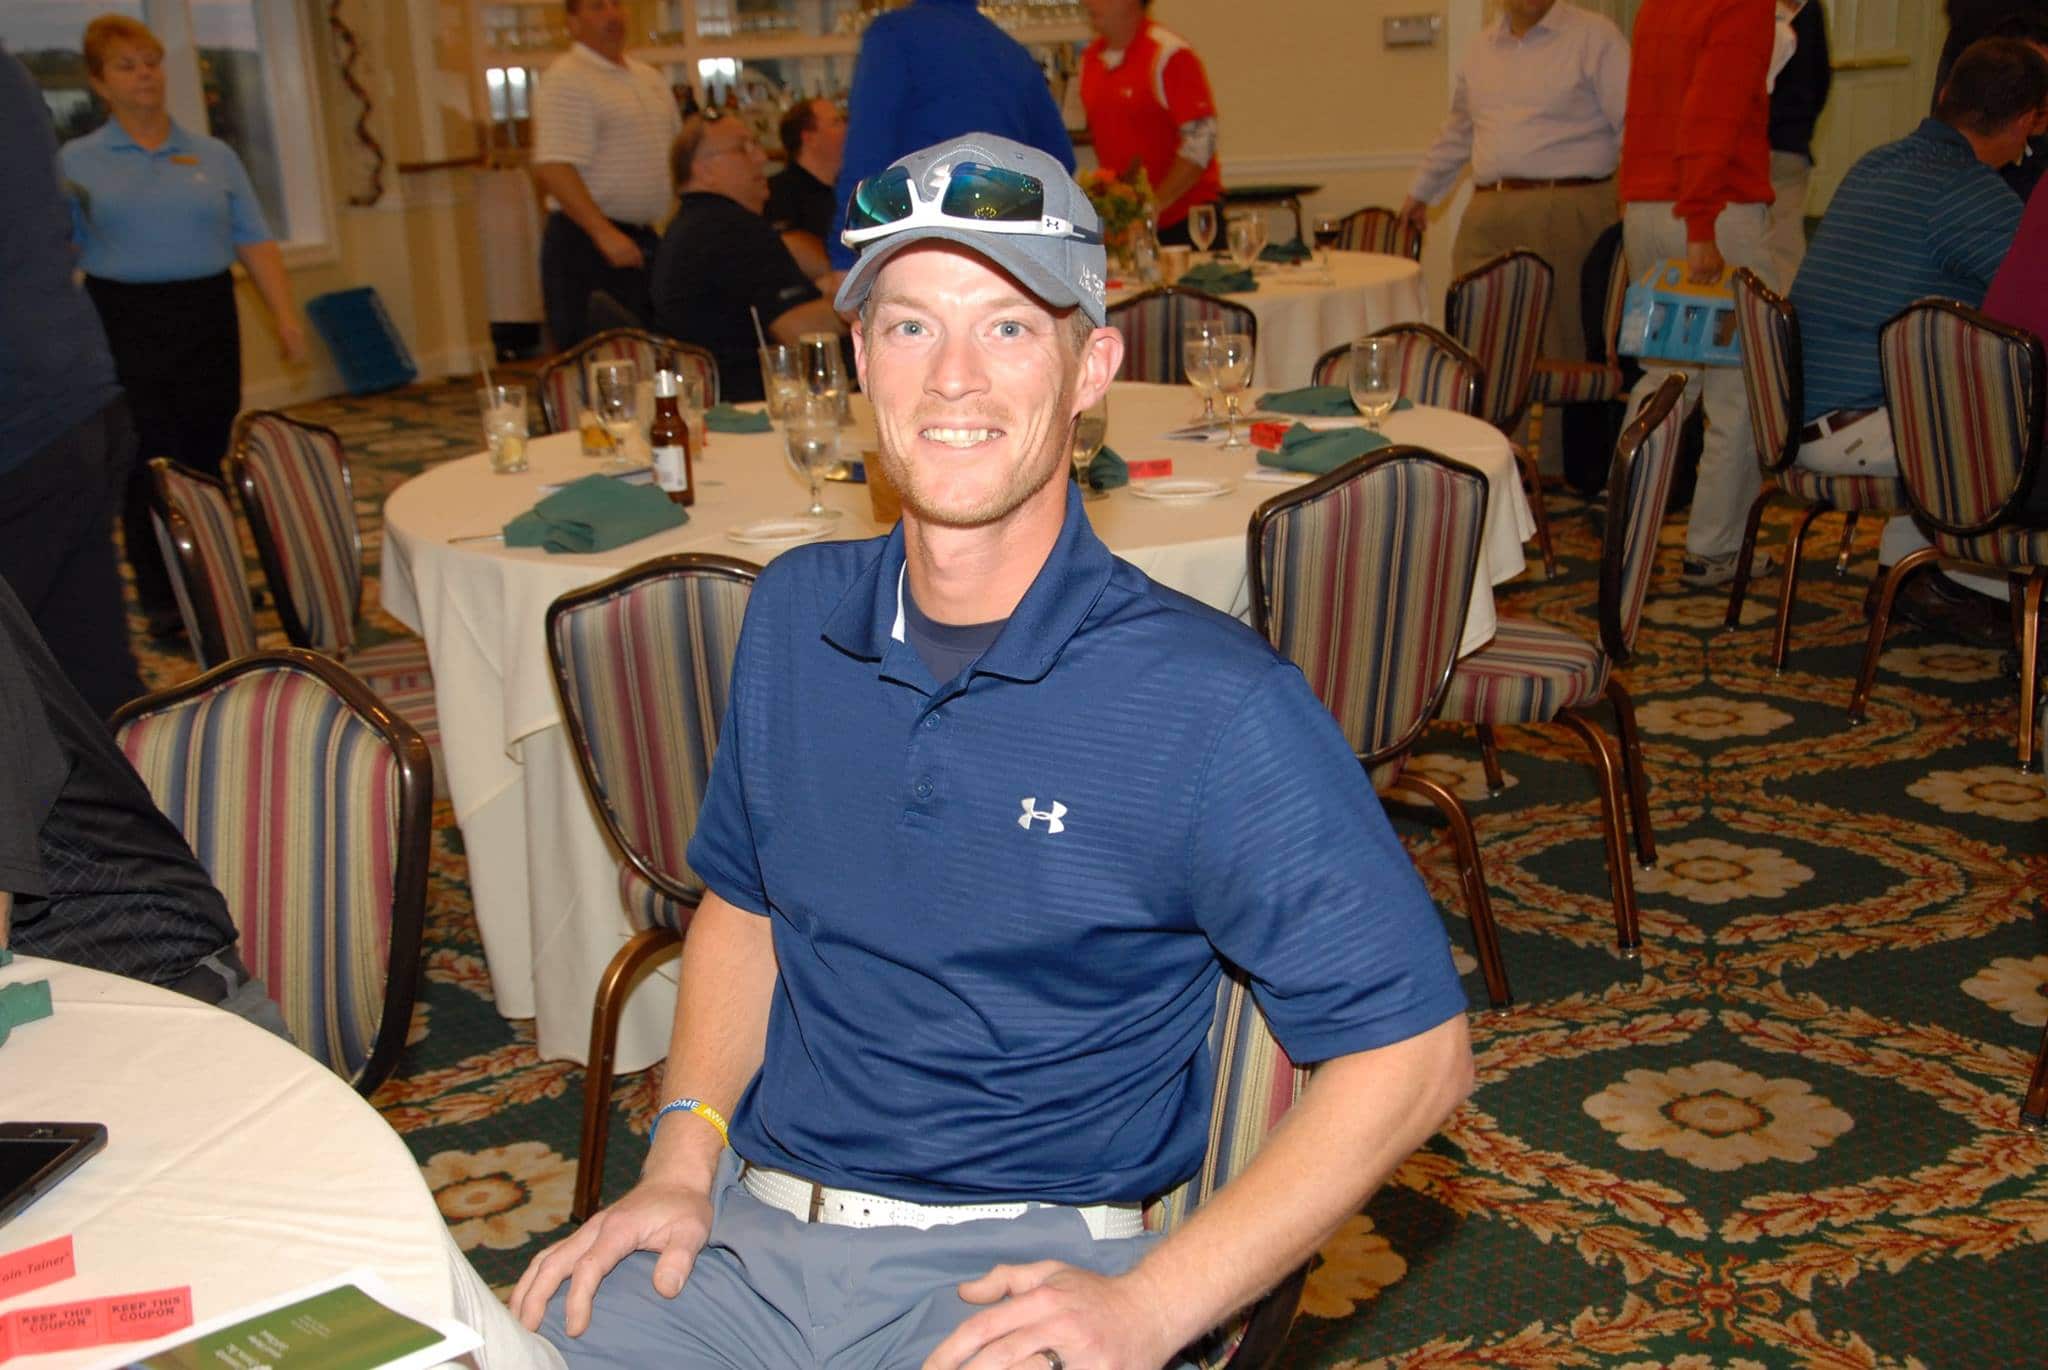 On October 5, 2015, Community Options, a national nonprofit dedicated to providing housing and employment support to people with intellectual and developmental disabilities, hosted its annual iMatter Golf Classic at Jericho National Golf Club in New Hope, PA